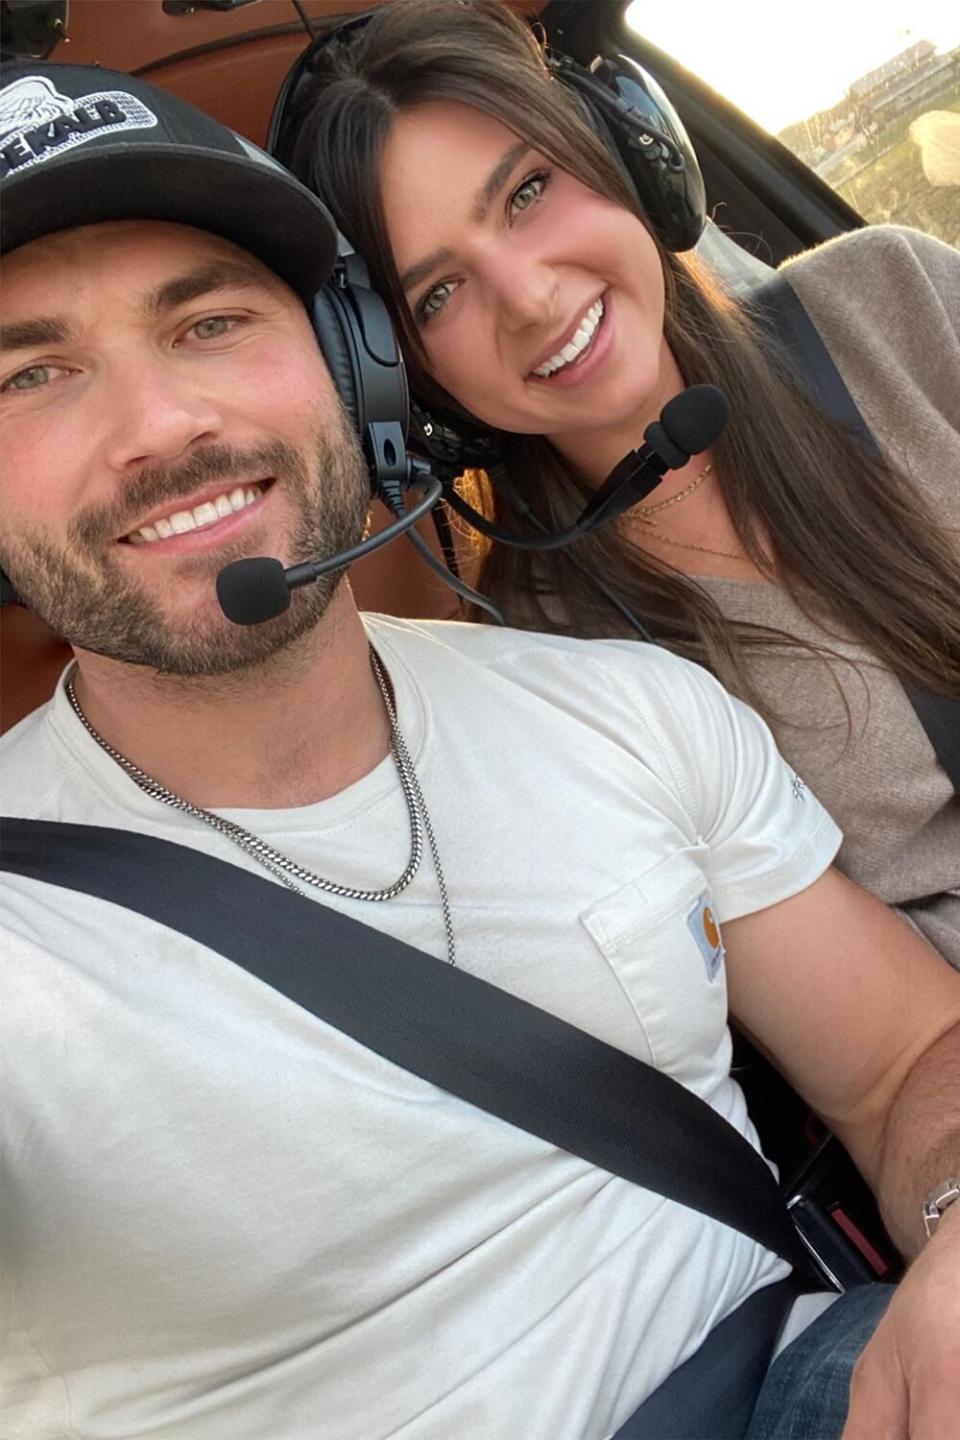 Annie Jorgensen and Steven McBee in a helicopter Where was the image taken – GallaCn MO When was the image taken – this past saturday Who took the photograph – Steven Full credit line –